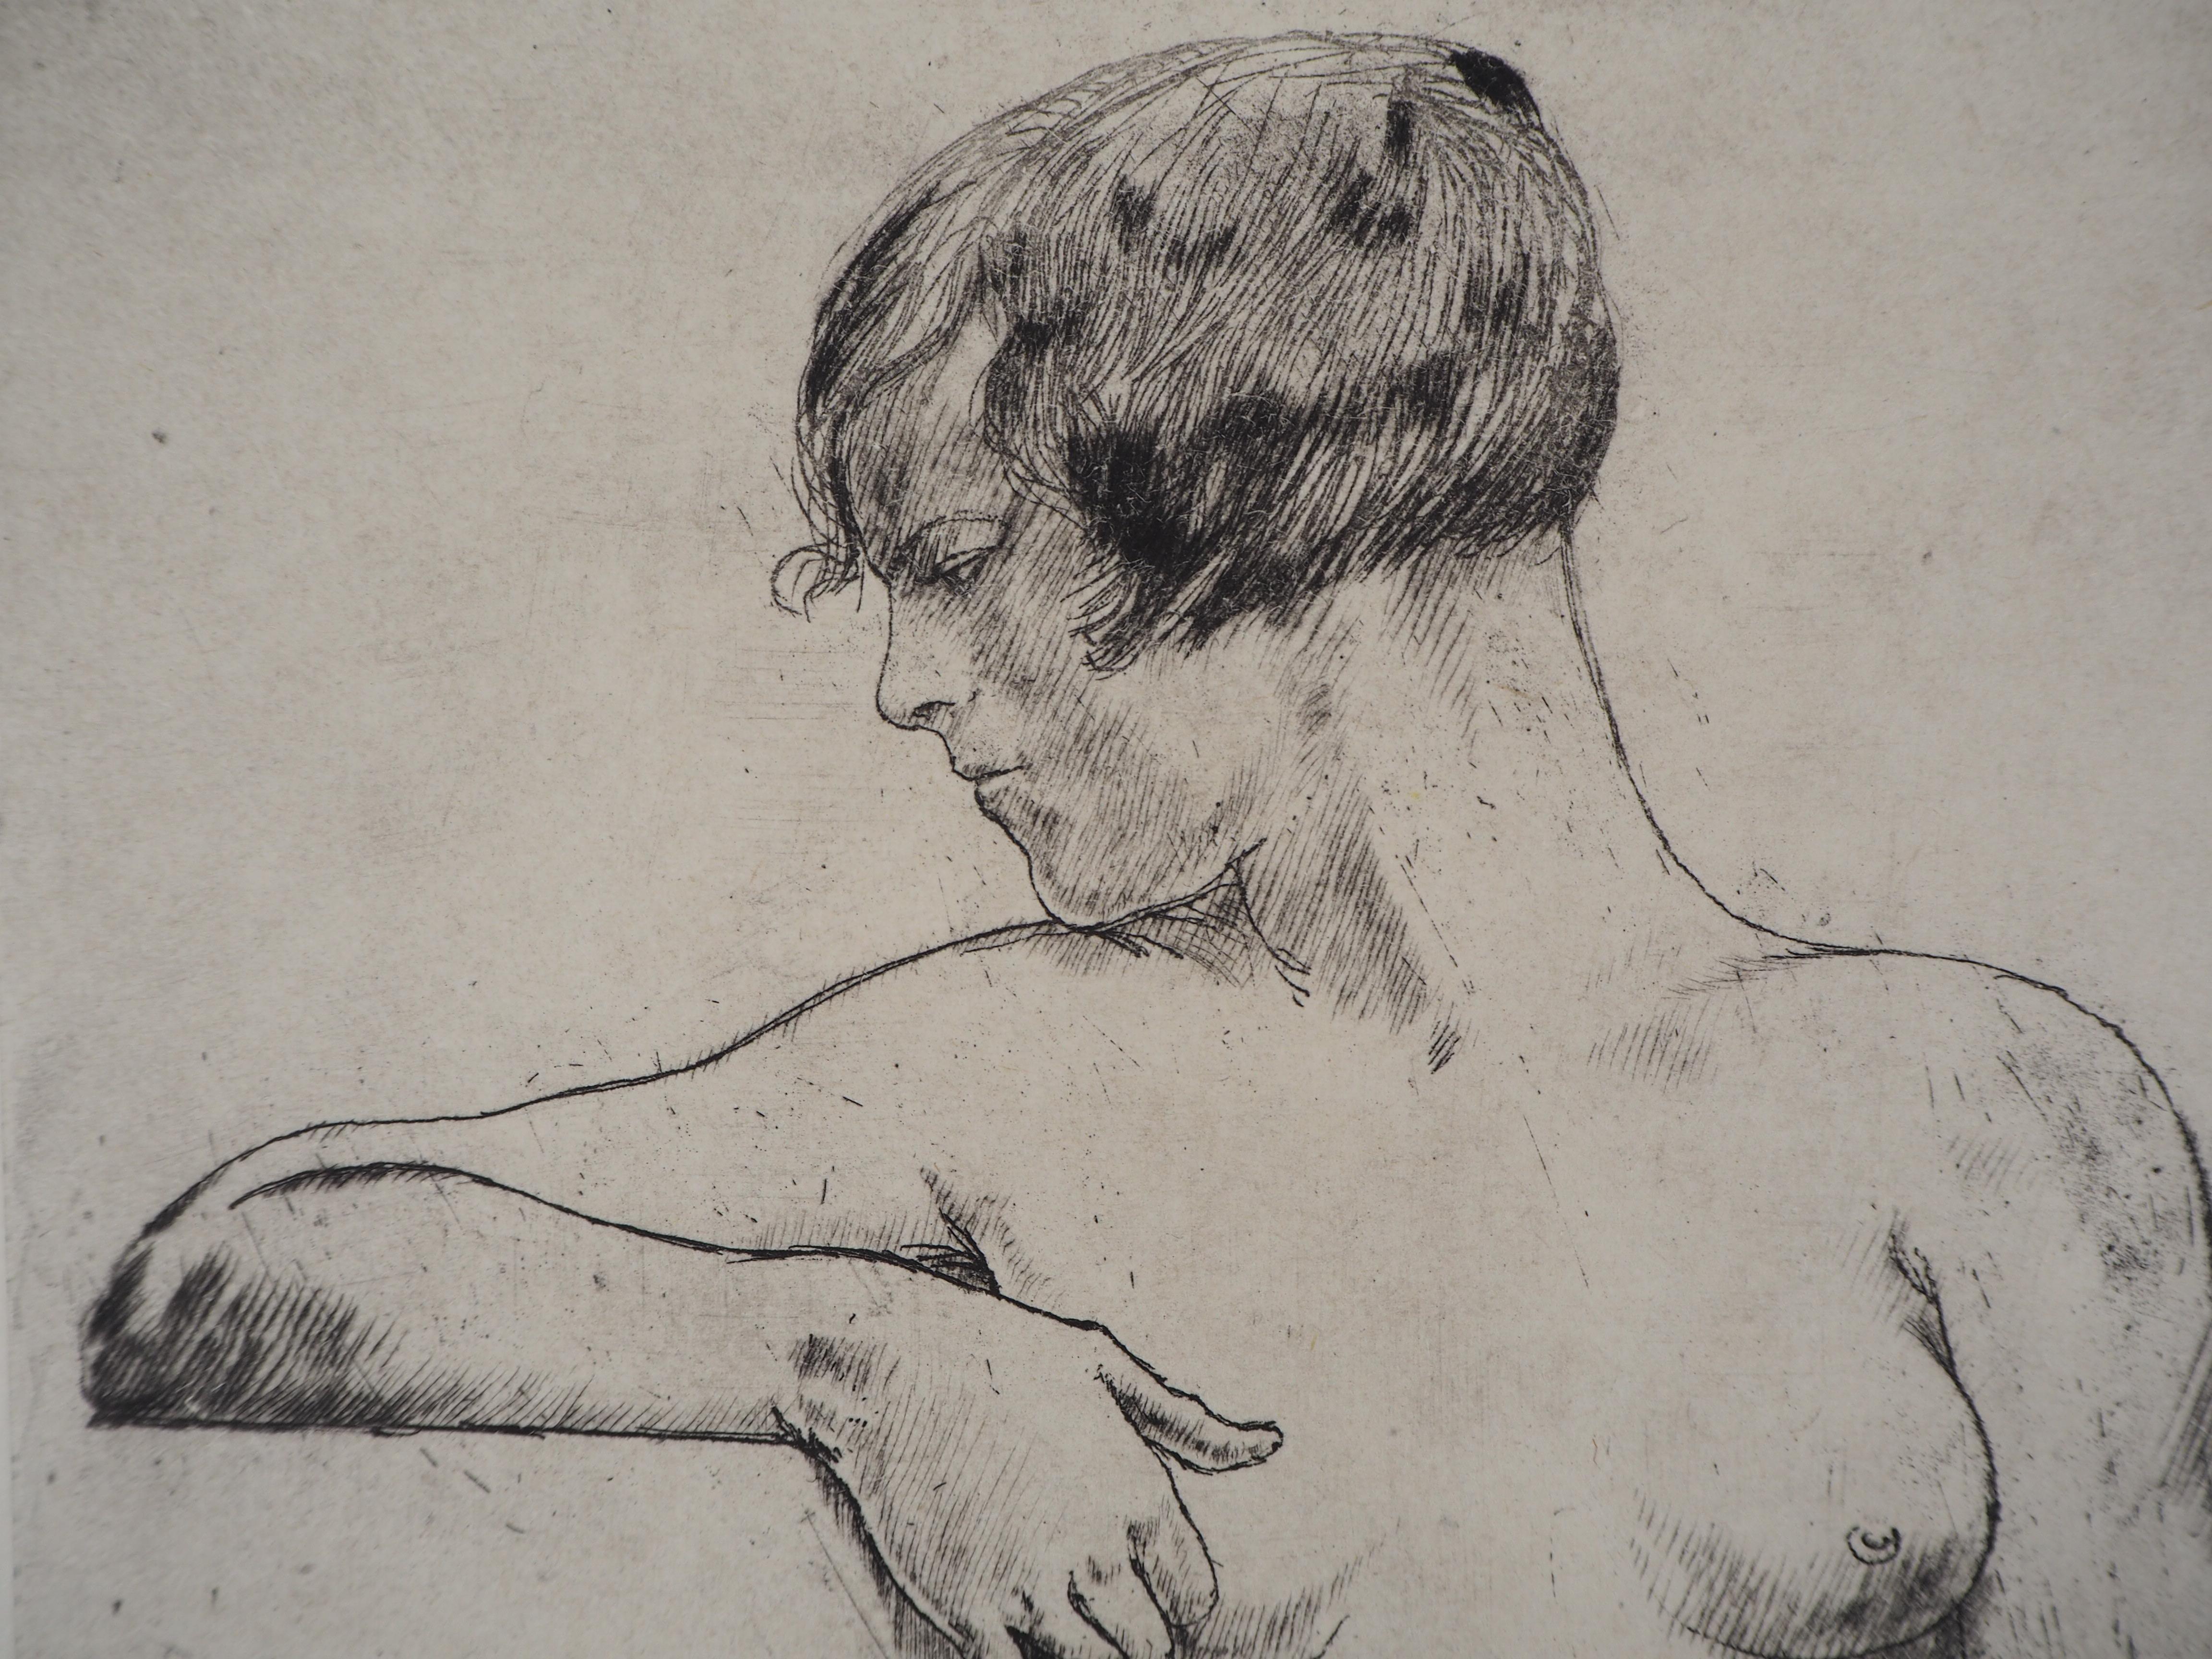 Leaning Nude - Original drypoint etching, Handsigned, 1928 - Brown Figurative Print by Armand Rassenfosse